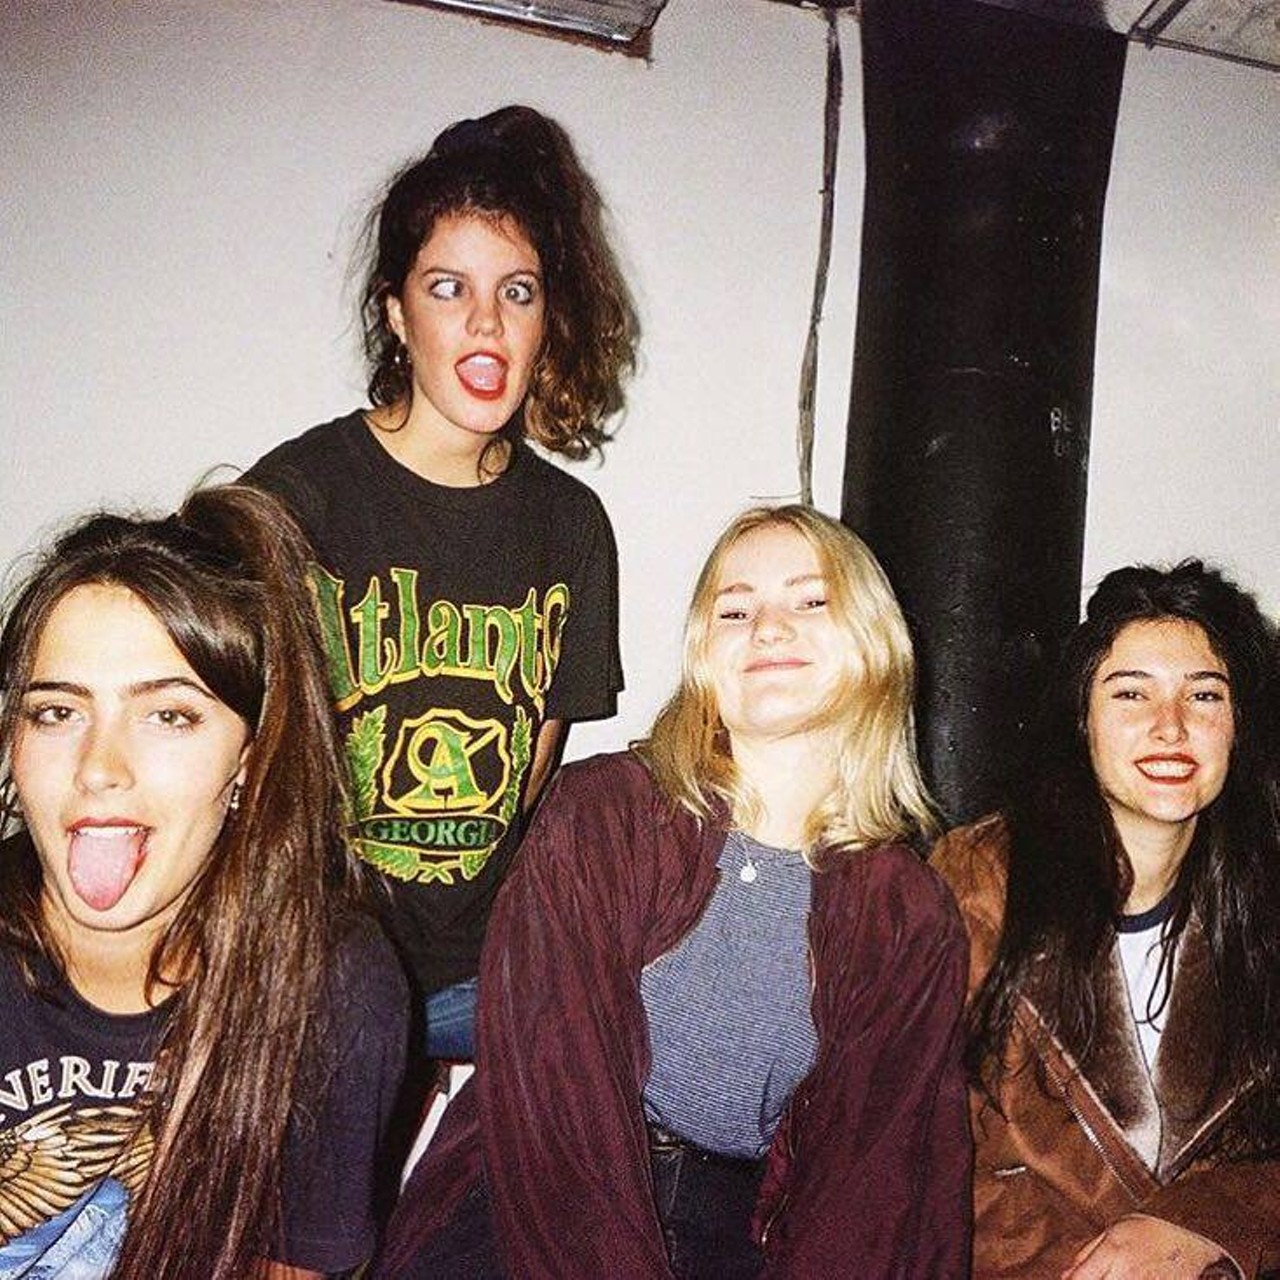 Hinds
This garage rock band from Madrid, Spain is starting to make waves over here in America. Their much anticipated debut album Leave Me Alone came out this past January and they haven&#146;t stopped touring since. Their lyrics are described as "a series of long drunk texts that you didn&#146;t mean to send," but Hinds did because they are not ashamed of any of the partying or flirtations with boys. They have a real DIY esthetic that is refreshing and intriguing. 
Essential tracks: &#147;Garden,&#148; &#147;San Diego,&#148; and &#147;Chili Town.&#148;